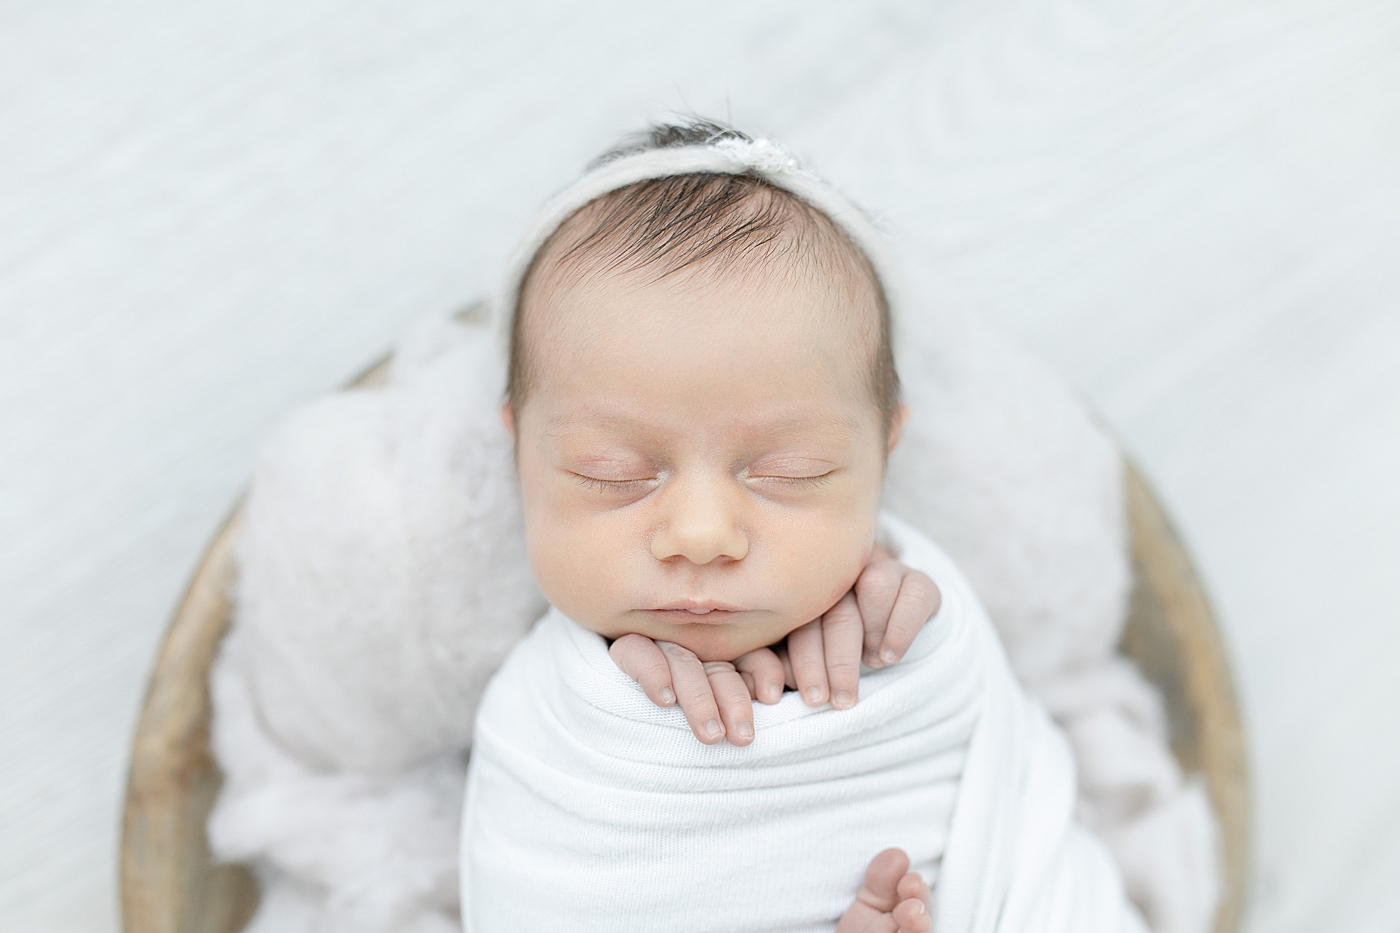 Newborn baby during studio session in swaddle | Photo by Little Sunshine Photography.